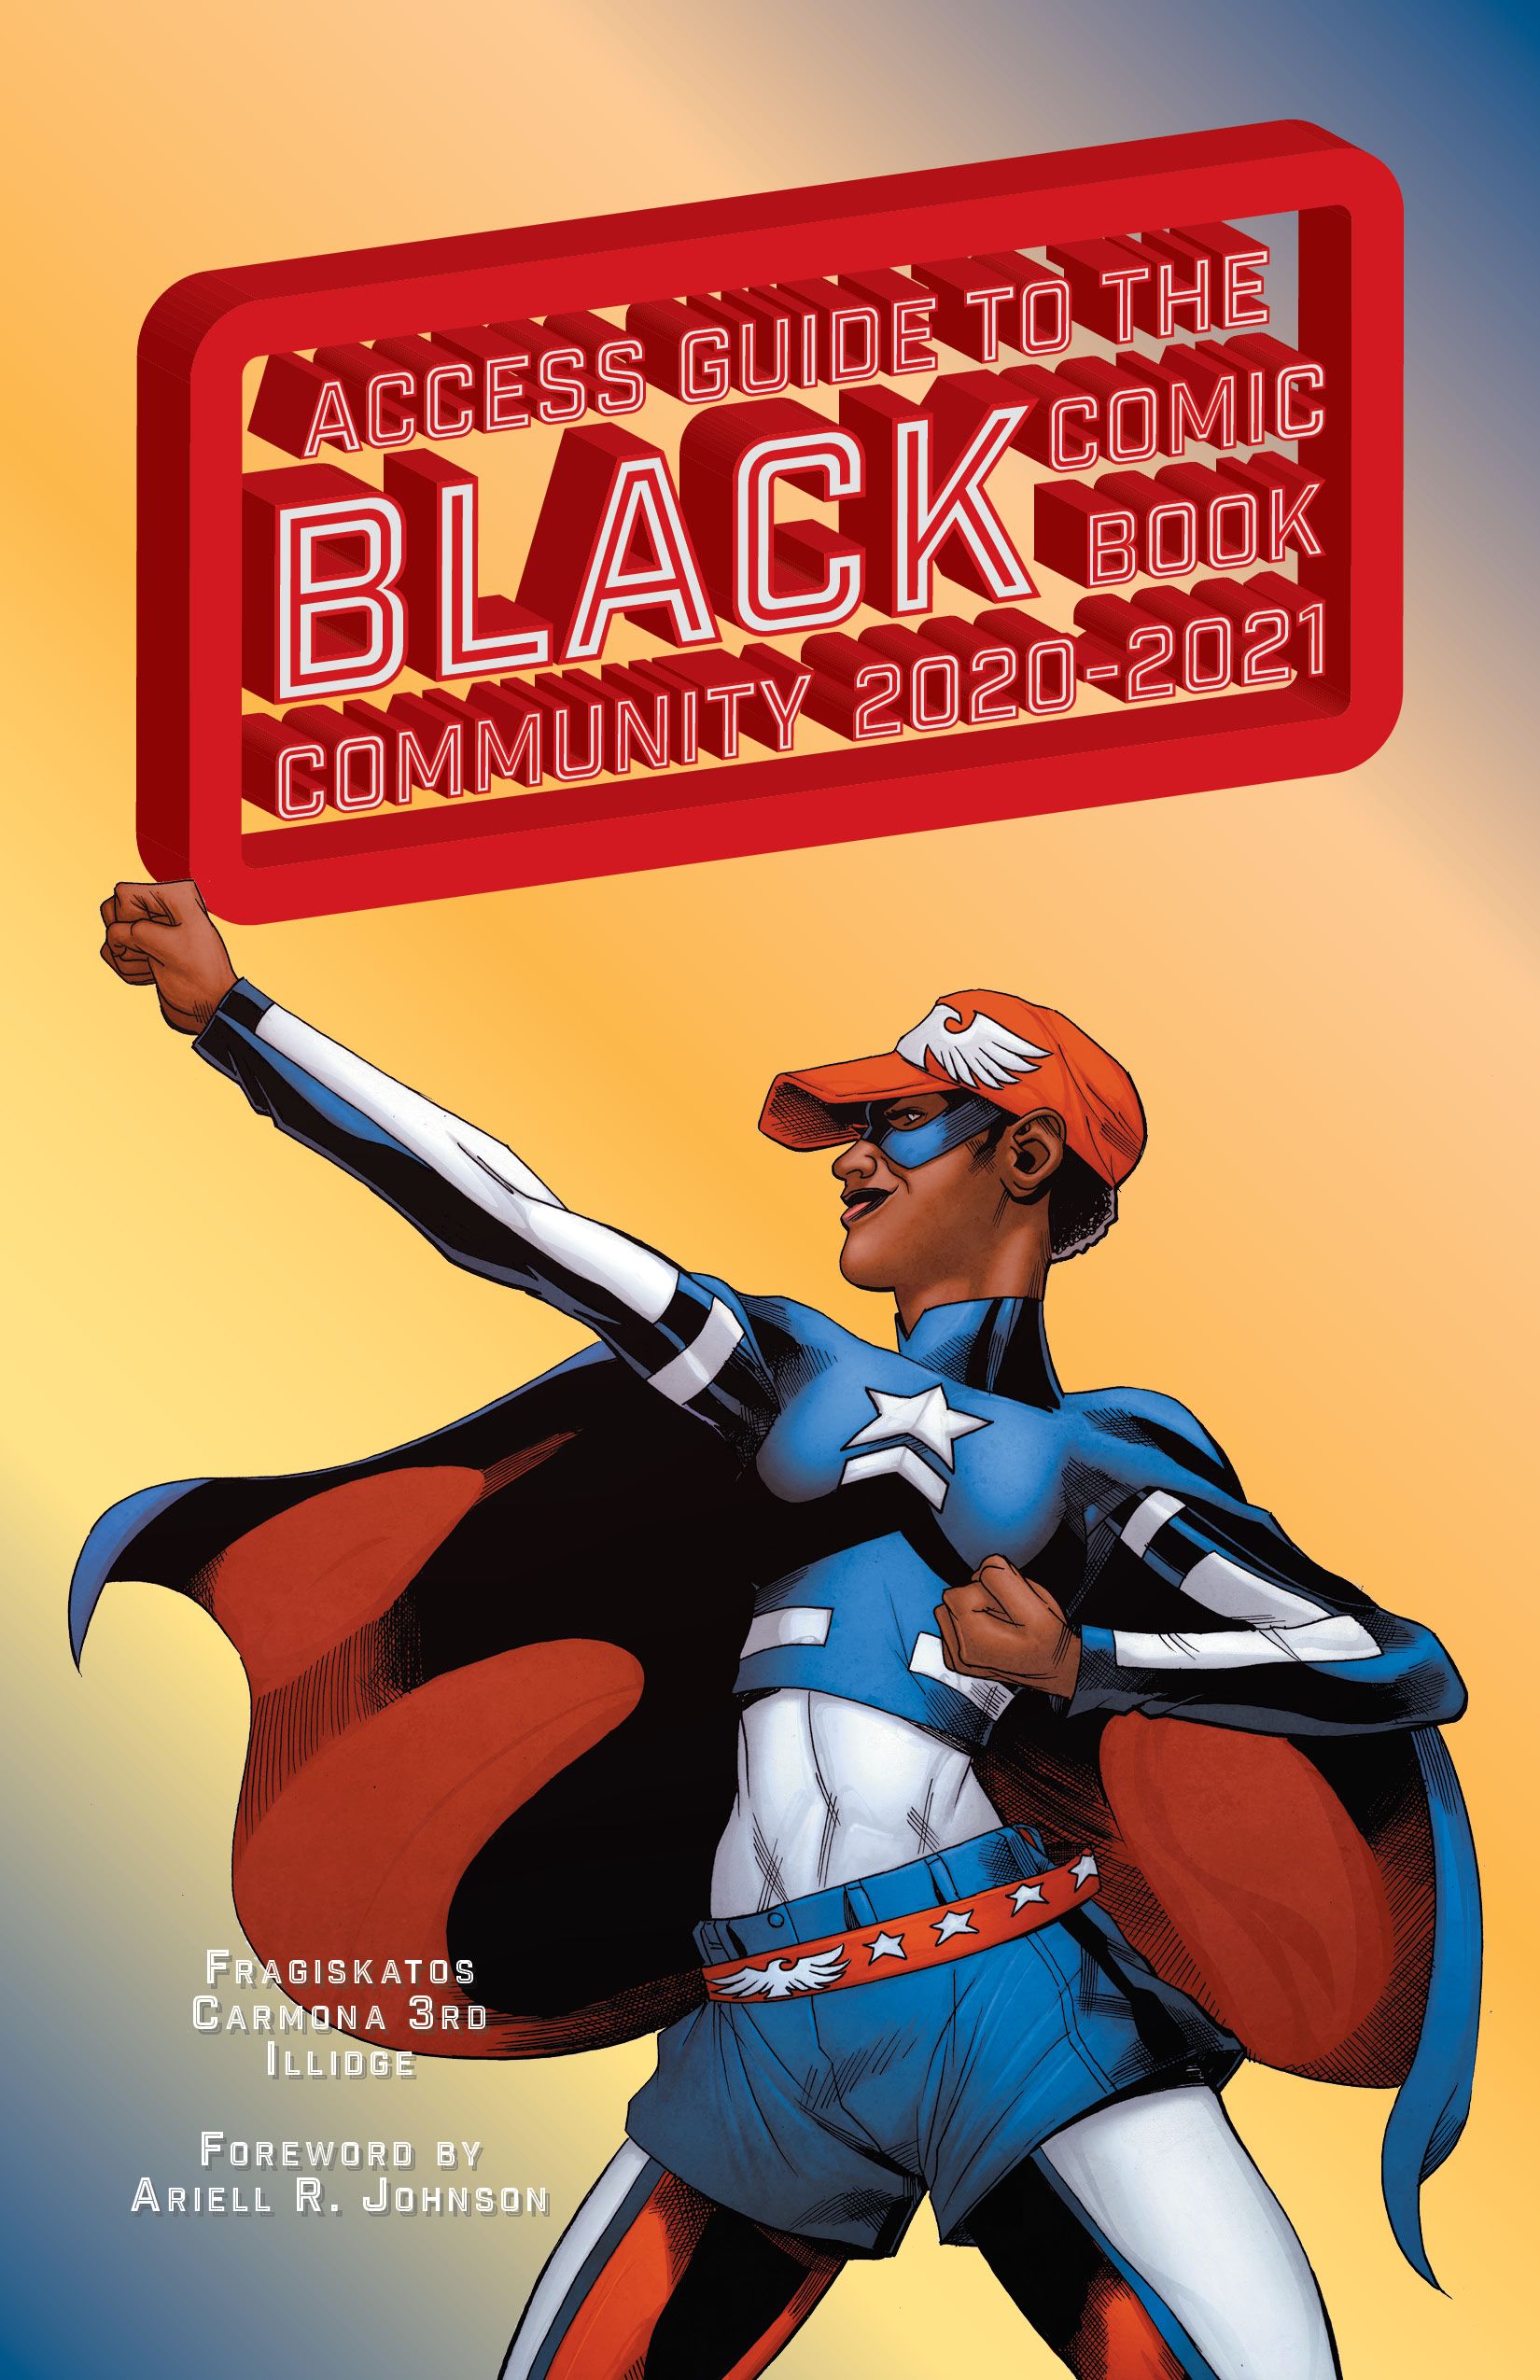 Access Guide To the Black Comic Book Community 2020-2021